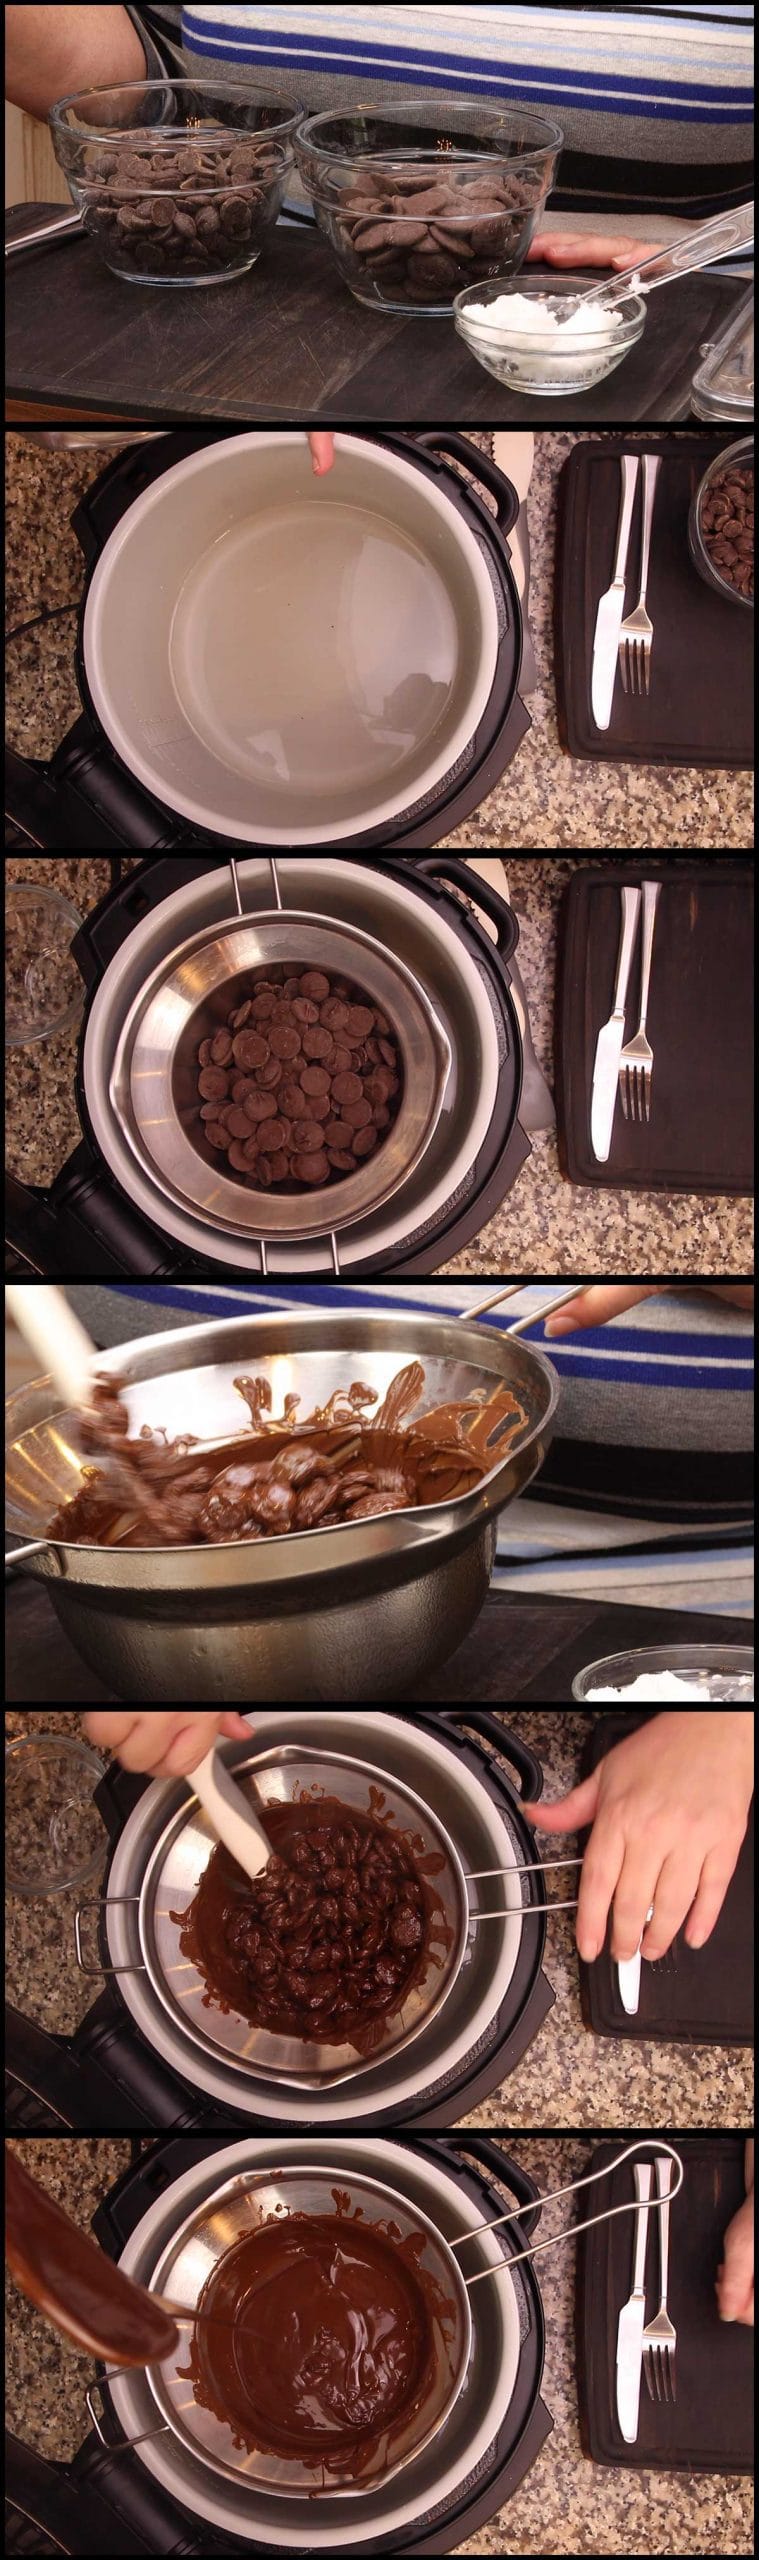 melting the chocolate for dipping